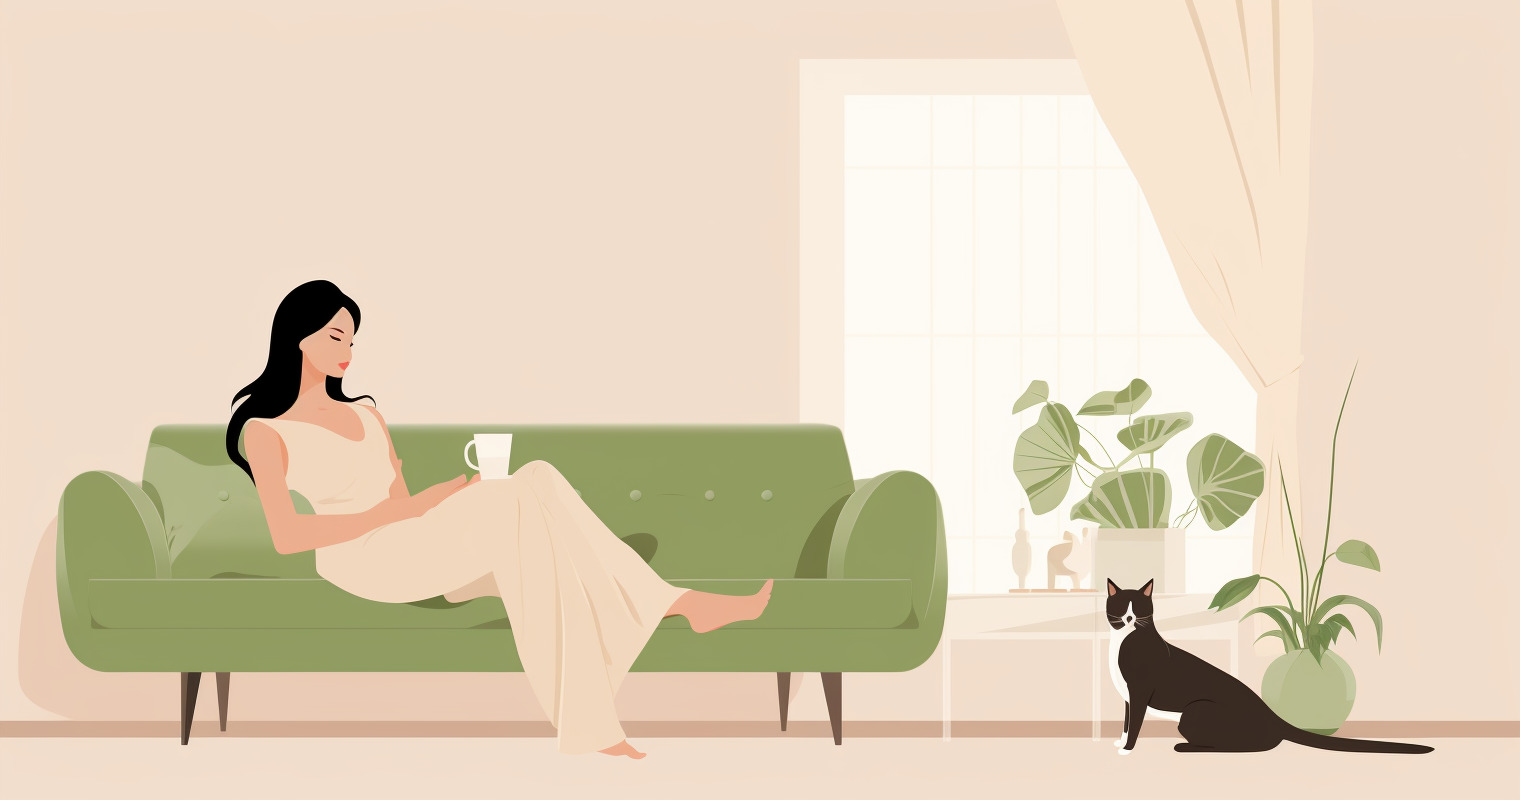 A woman lounges on a couch with a cat sitting on the floor.